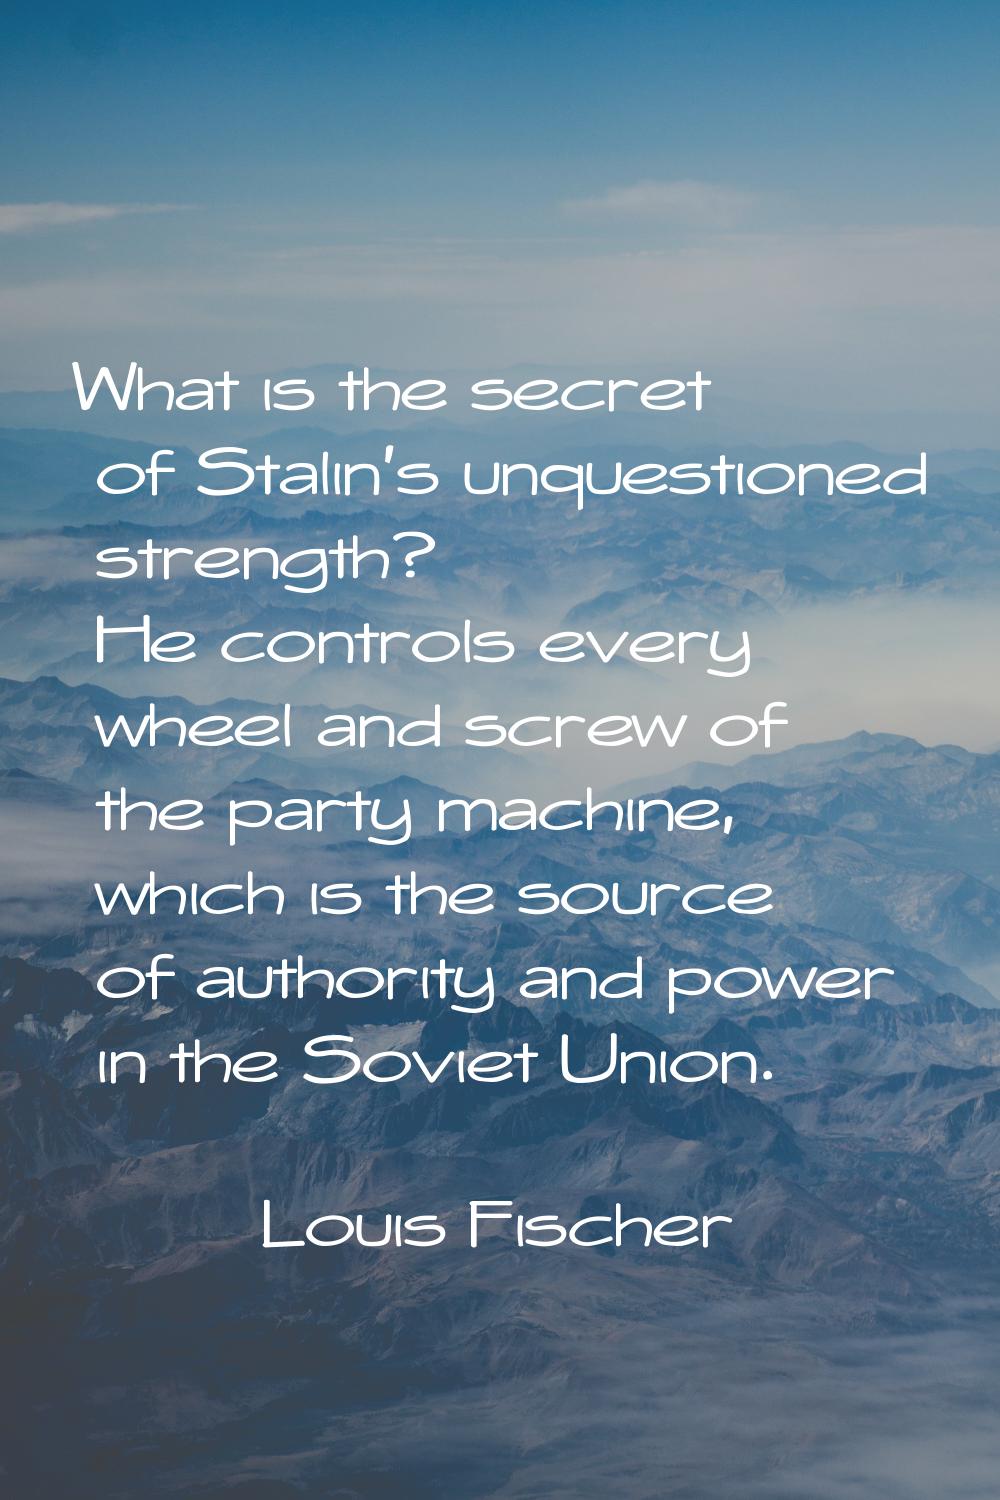 What is the secret of Stalin's unquestioned strength? He controls every wheel and screw of the part